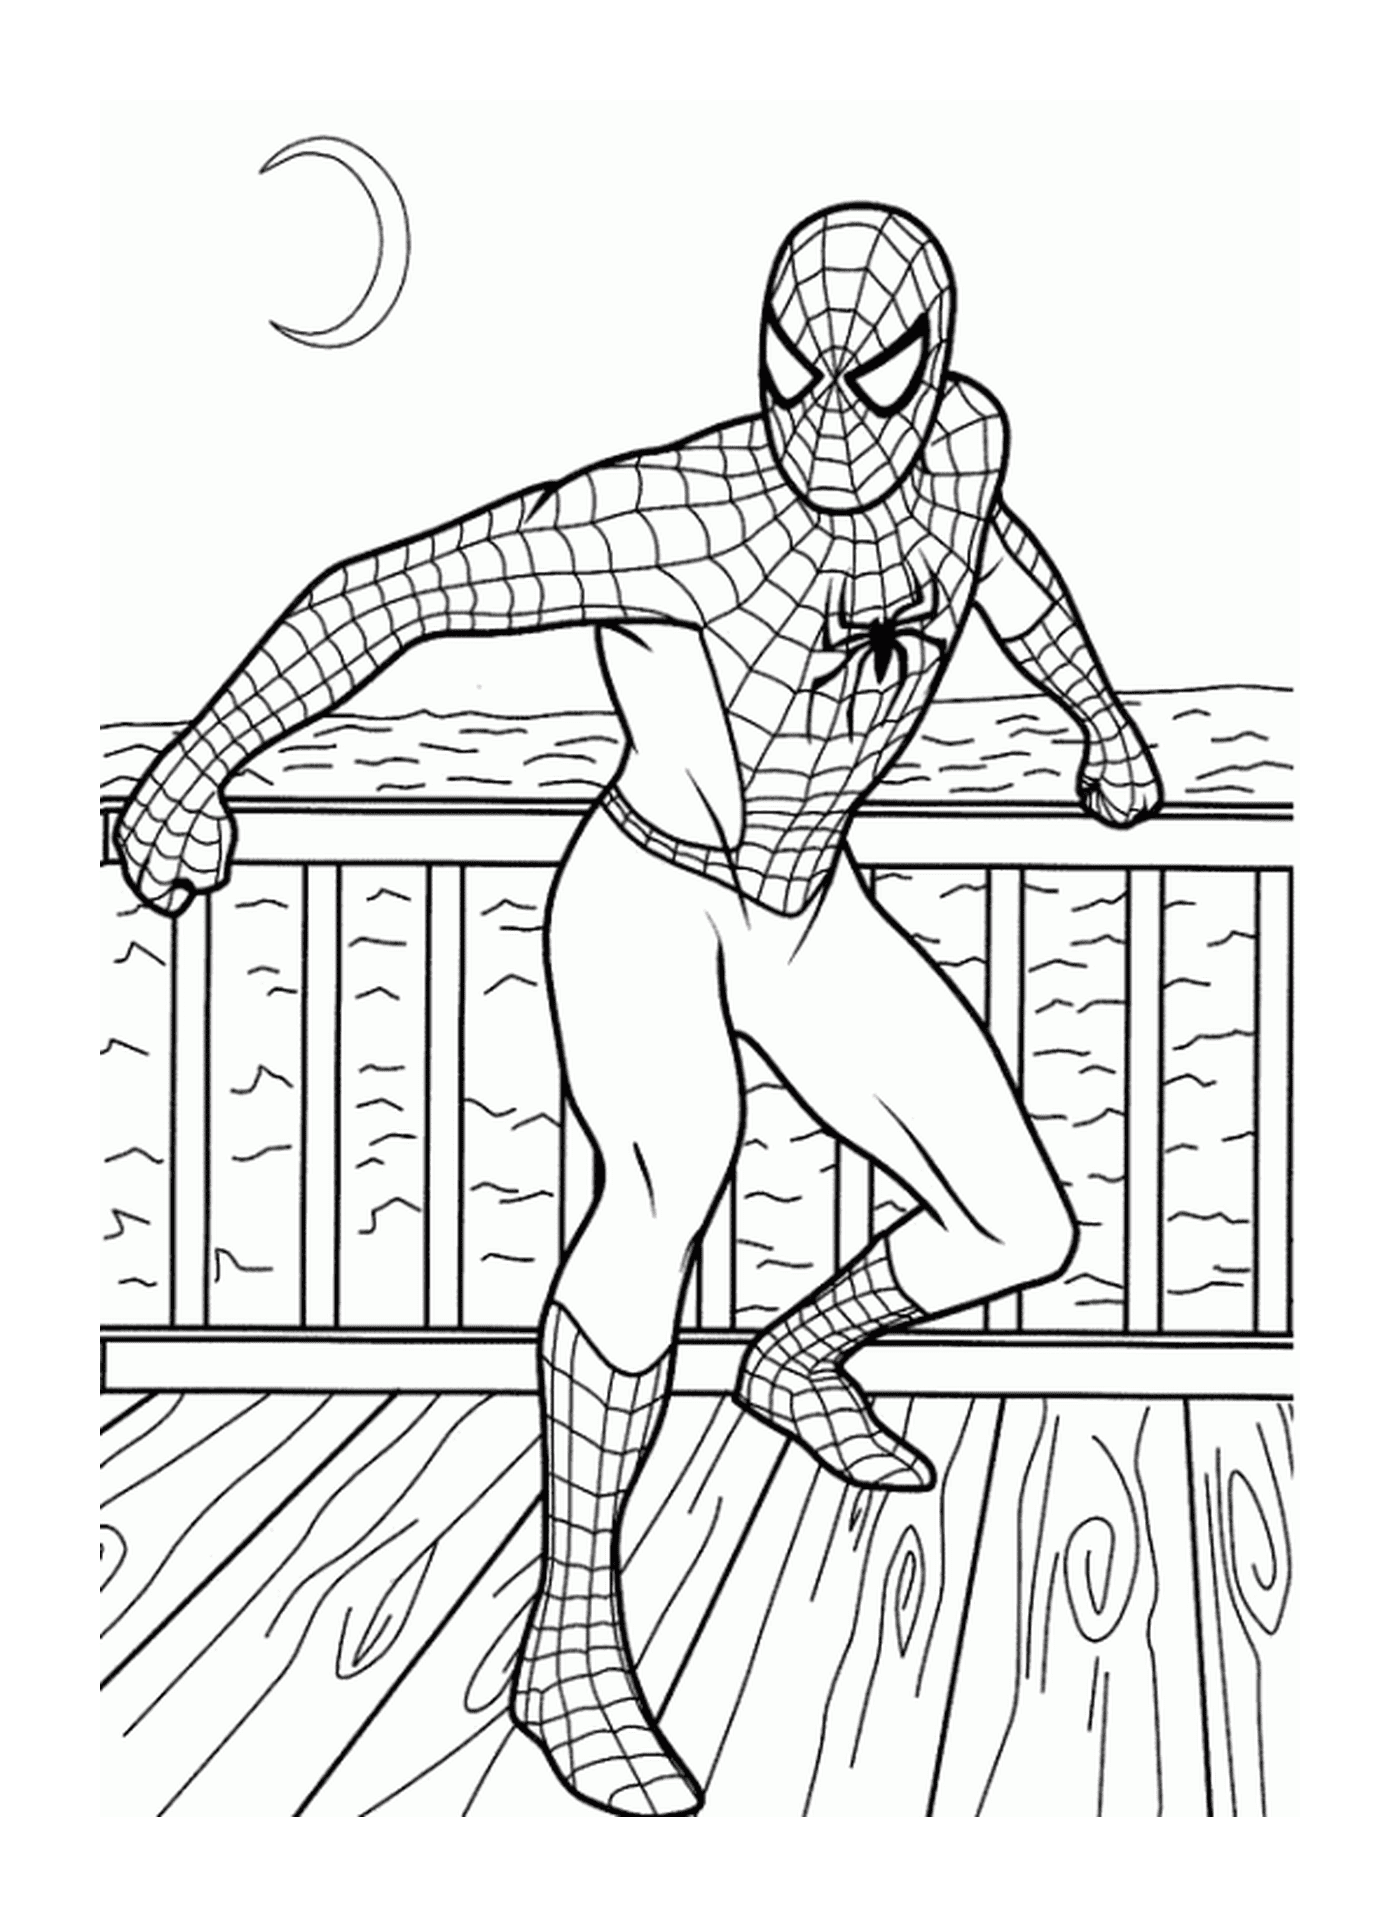  Spider-Man at the beach near the water 